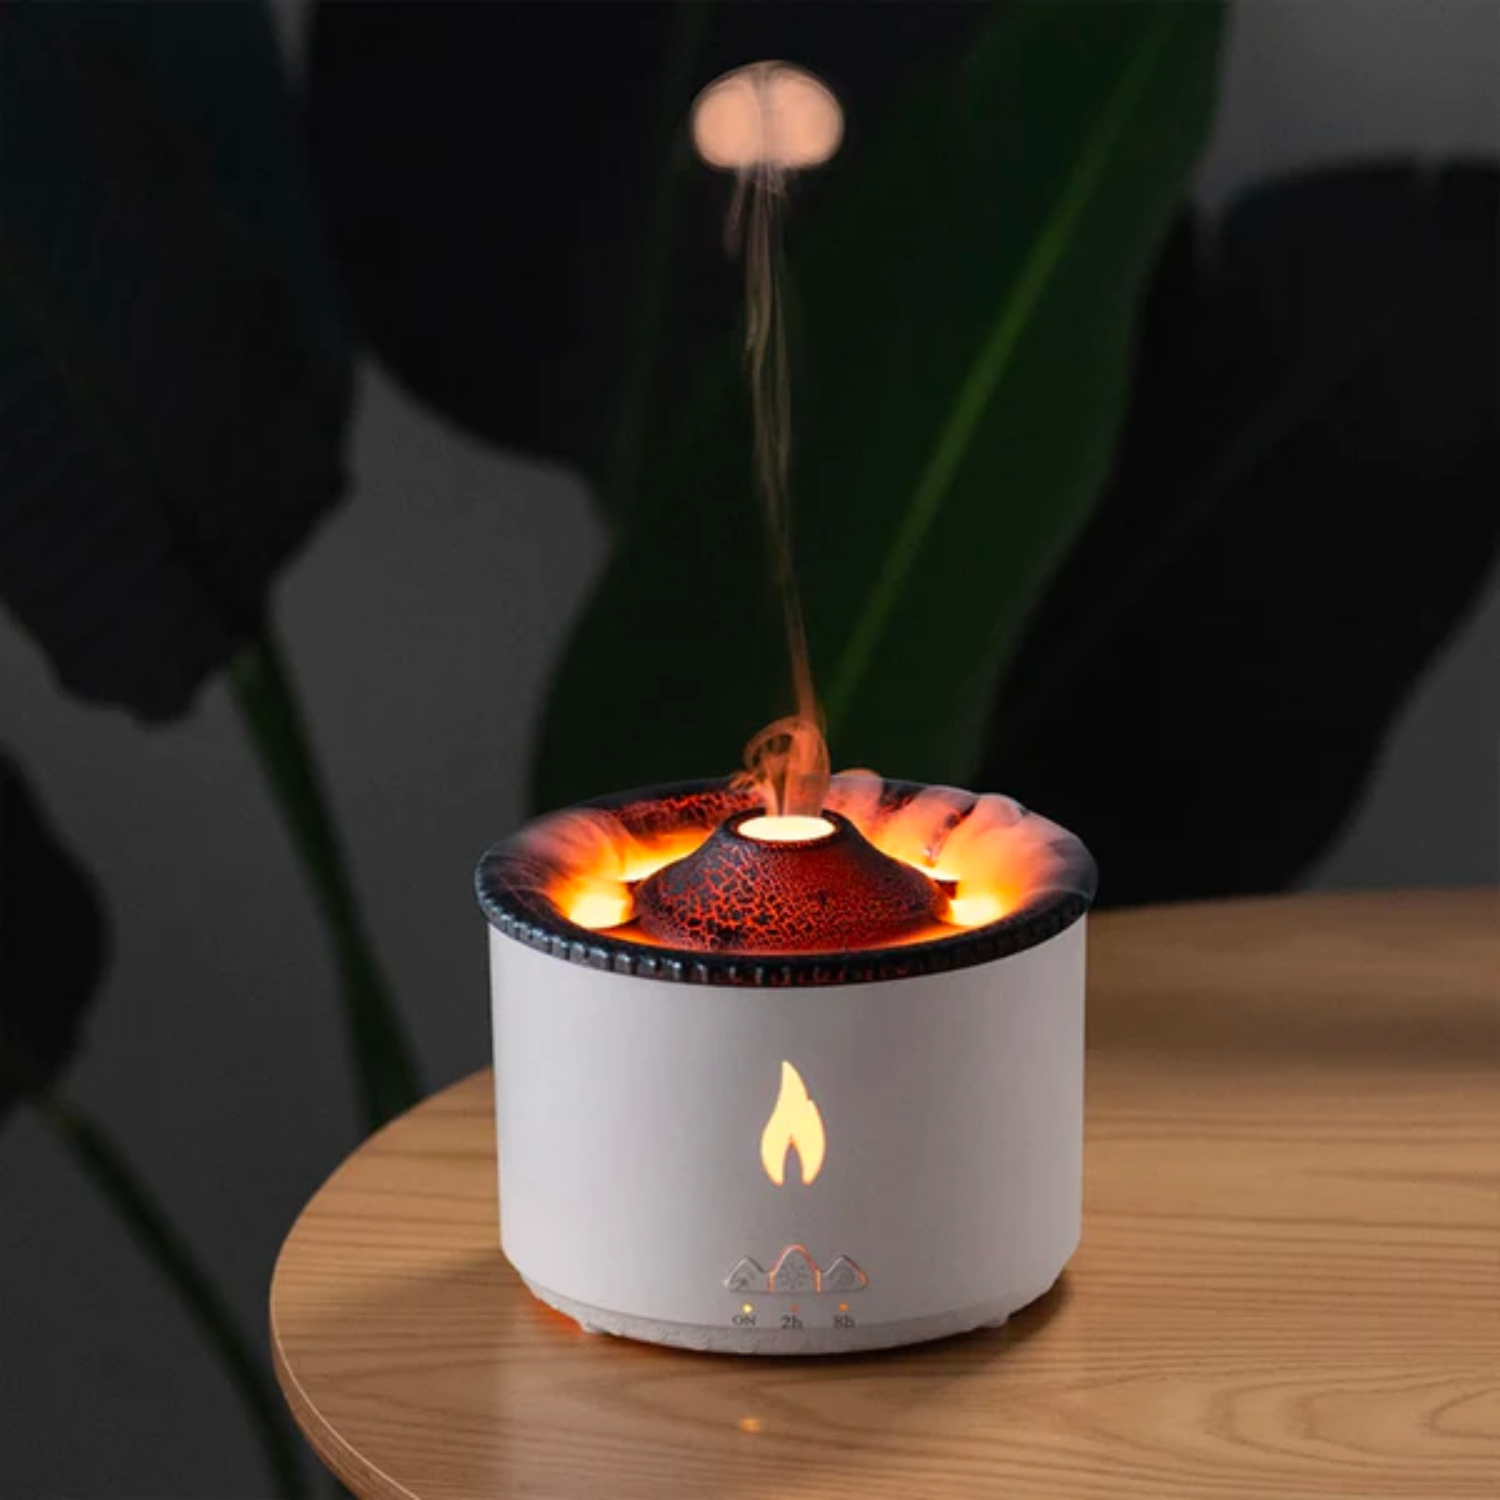 Ultrasonic Essential Oil Diffuser 2 Mist Modes Flame Volcano Light 300ml Aromatherapy Humidifier Timer Auto Shut Off Aroma Diffuser for TikTok Bedroom Spa Yoga Office Gift Ideal for Women